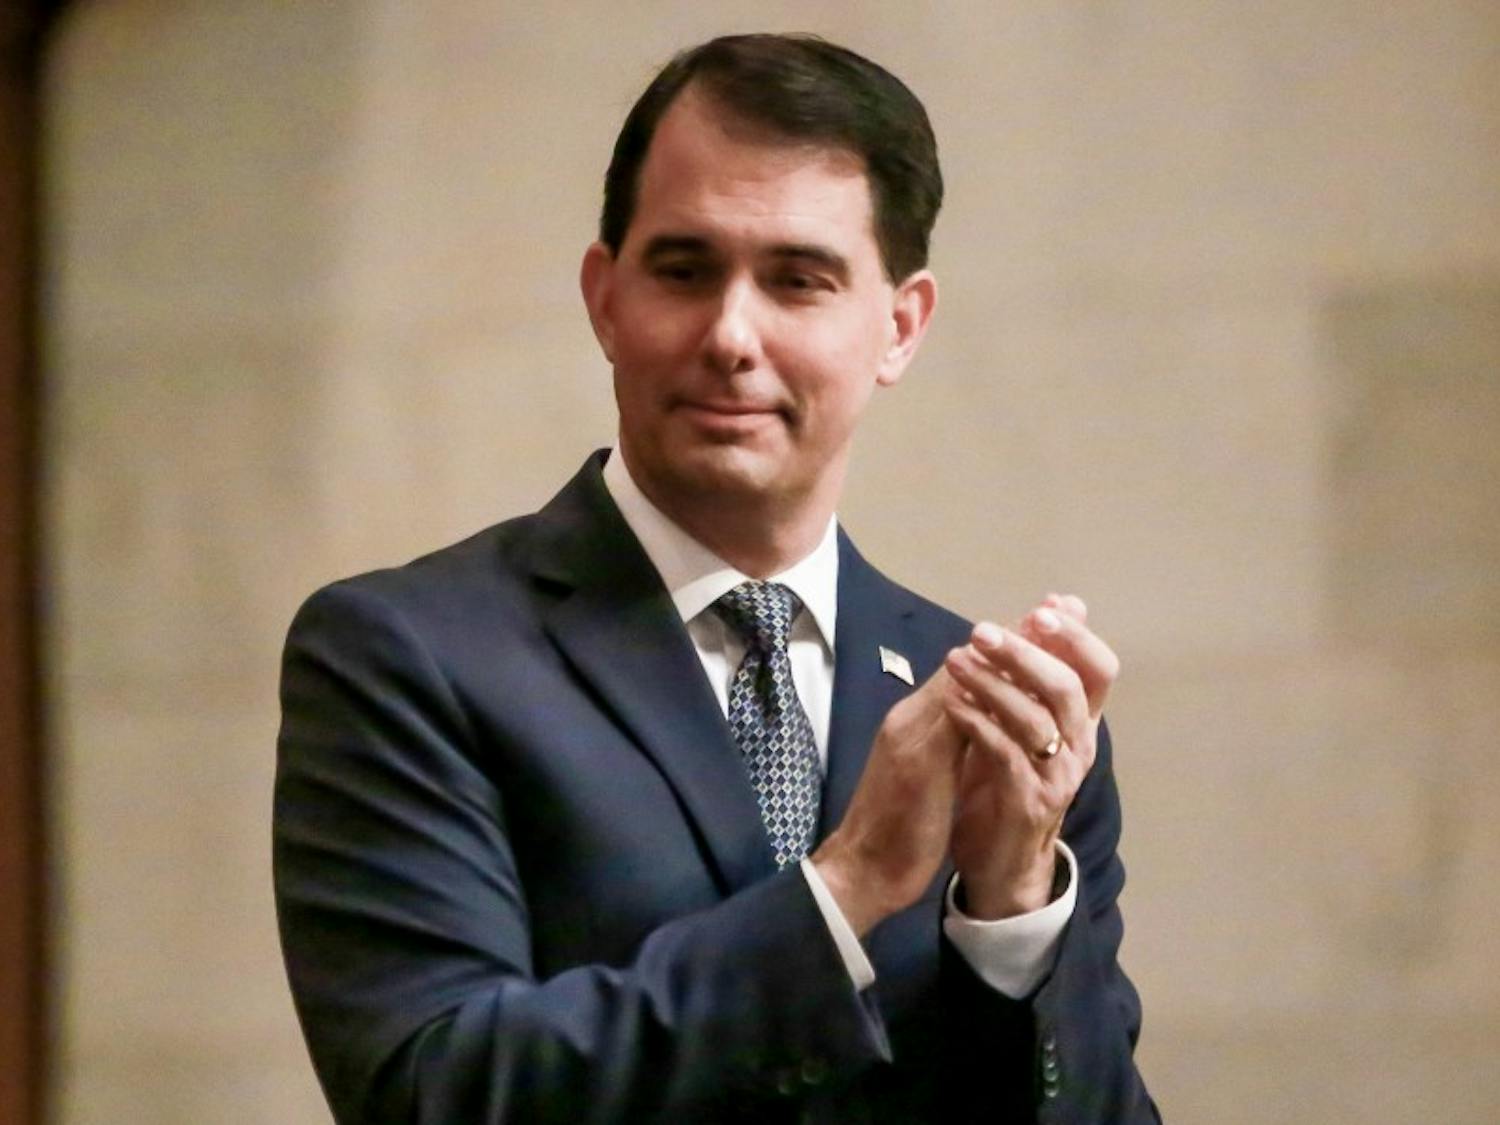 &nbsp;Gov. Scott Walker pledged $20 million more to less populated school districts and  $10.4 million for transportation costs in rural schools Wednesday as part of his K-12 public funding plan.